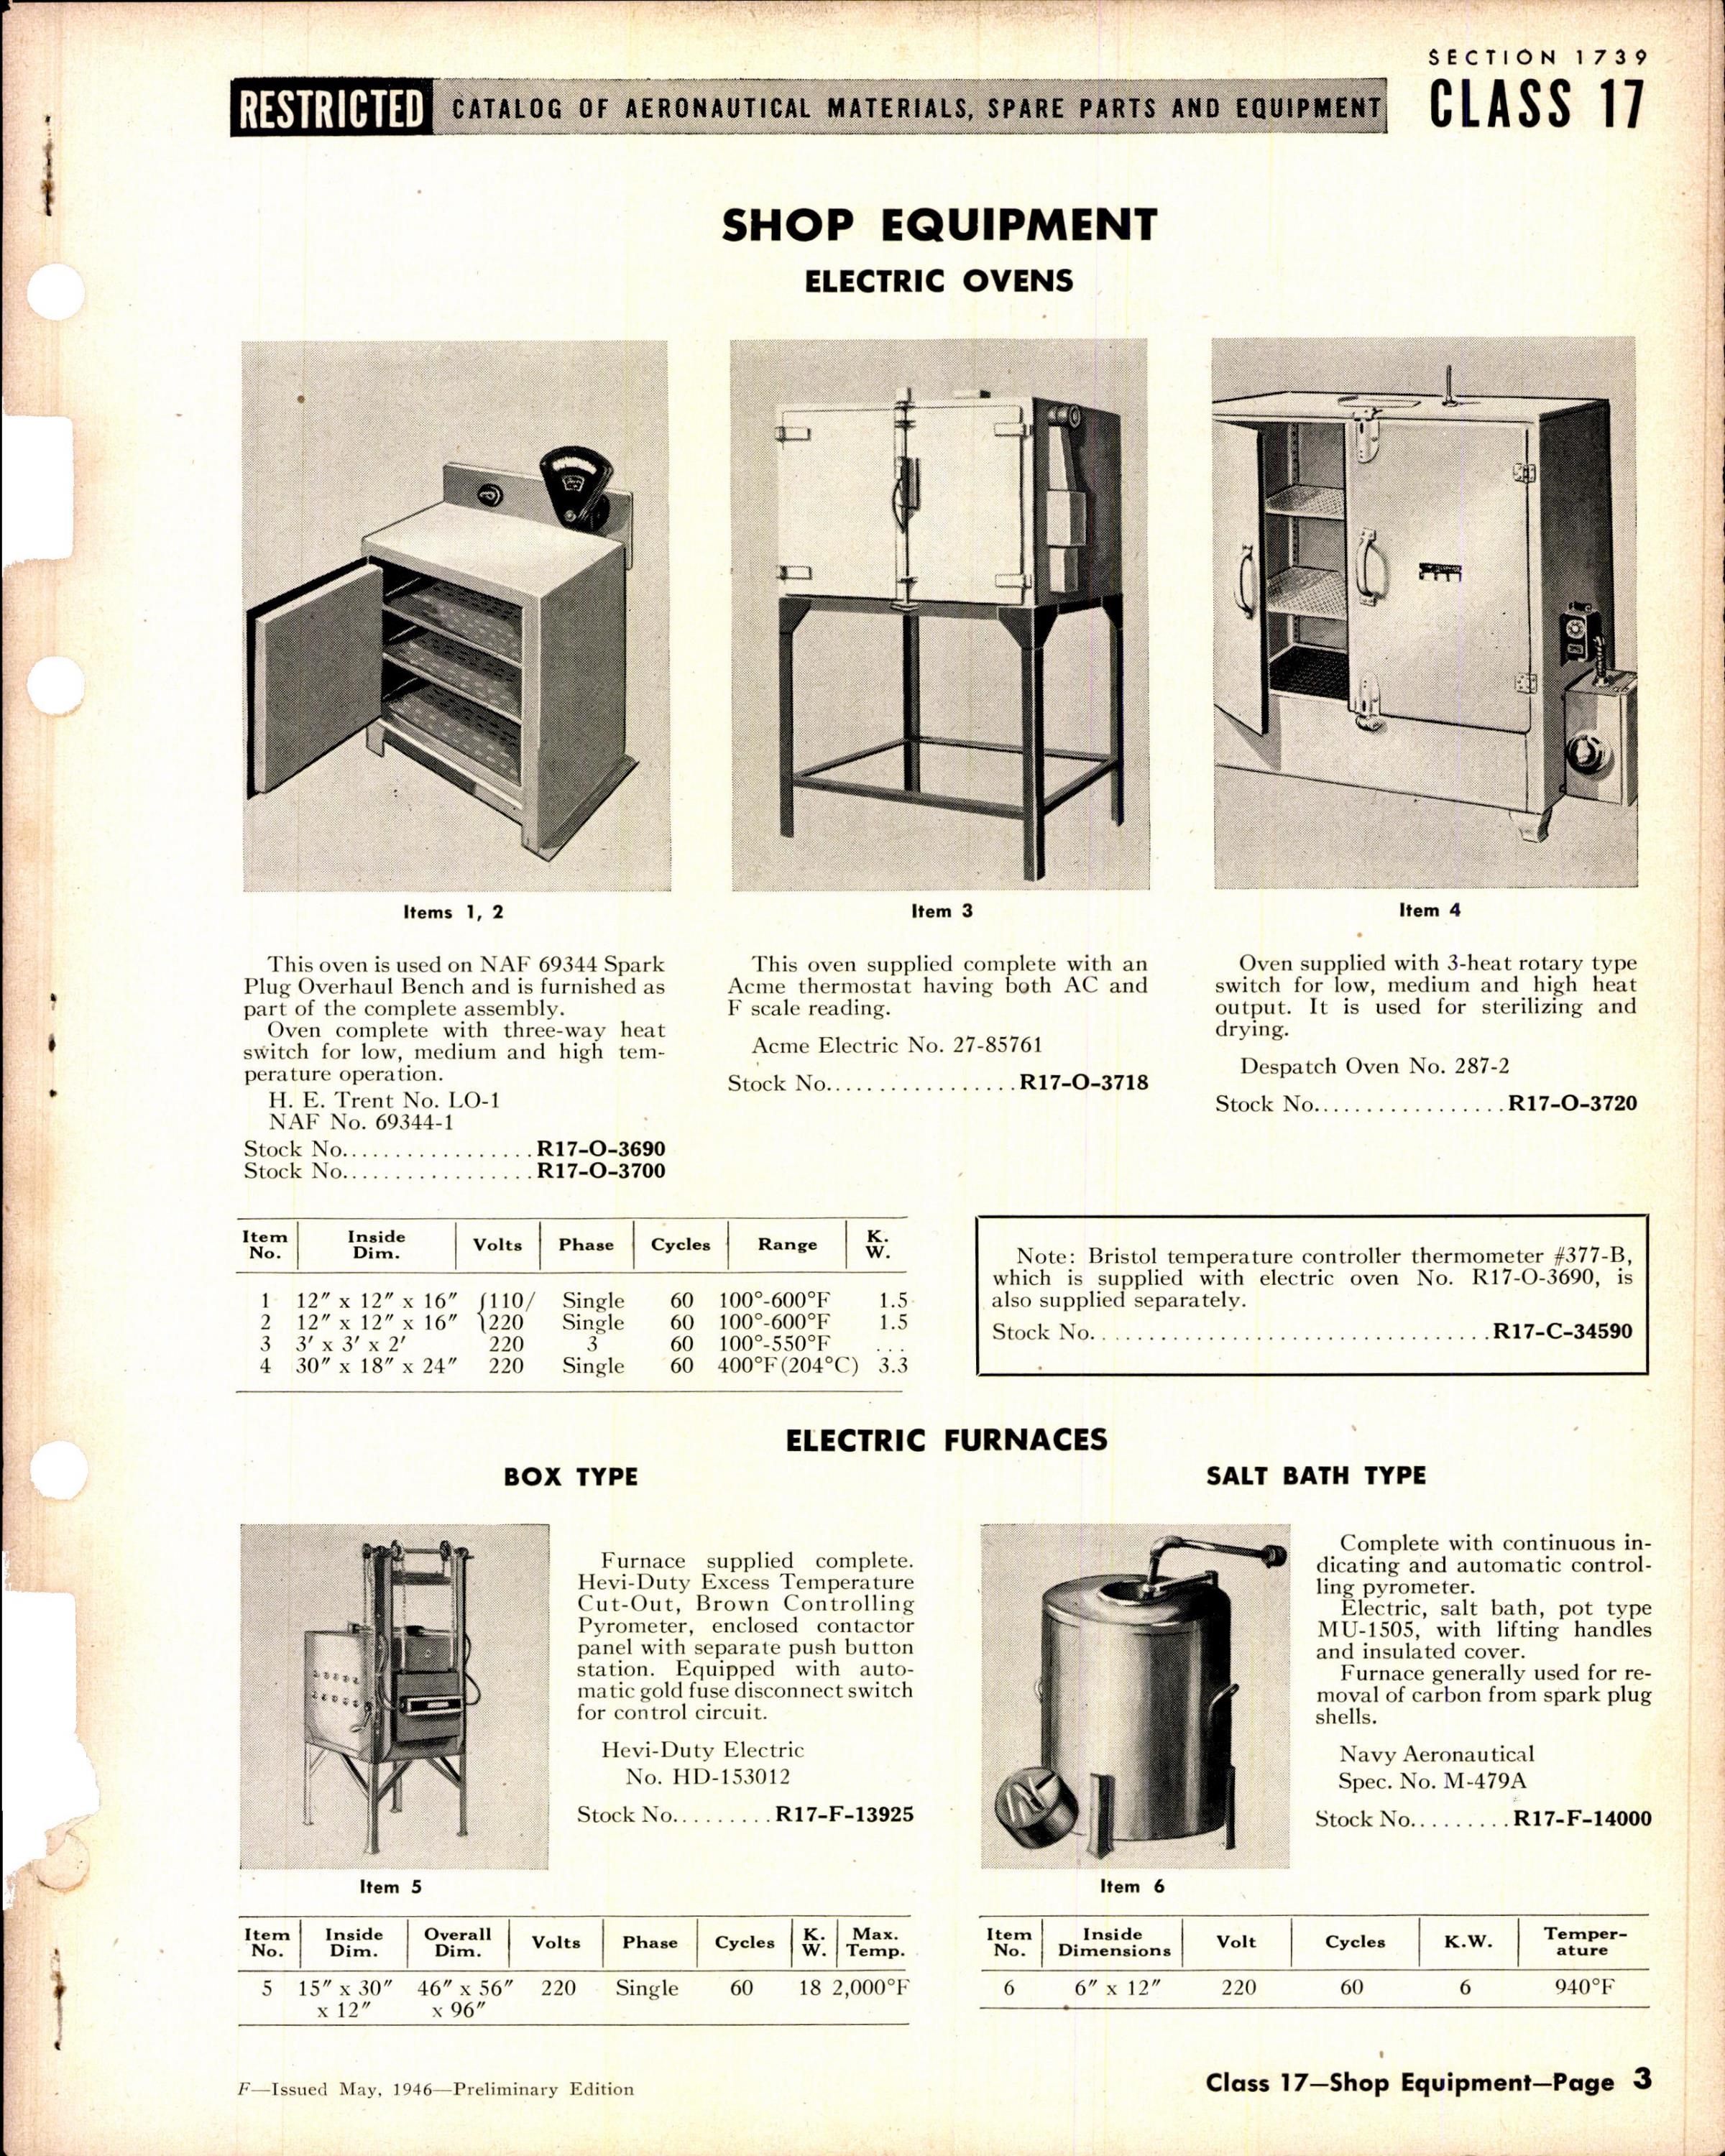 Sample page 3 from AirCorps Library document: Shop Equipment